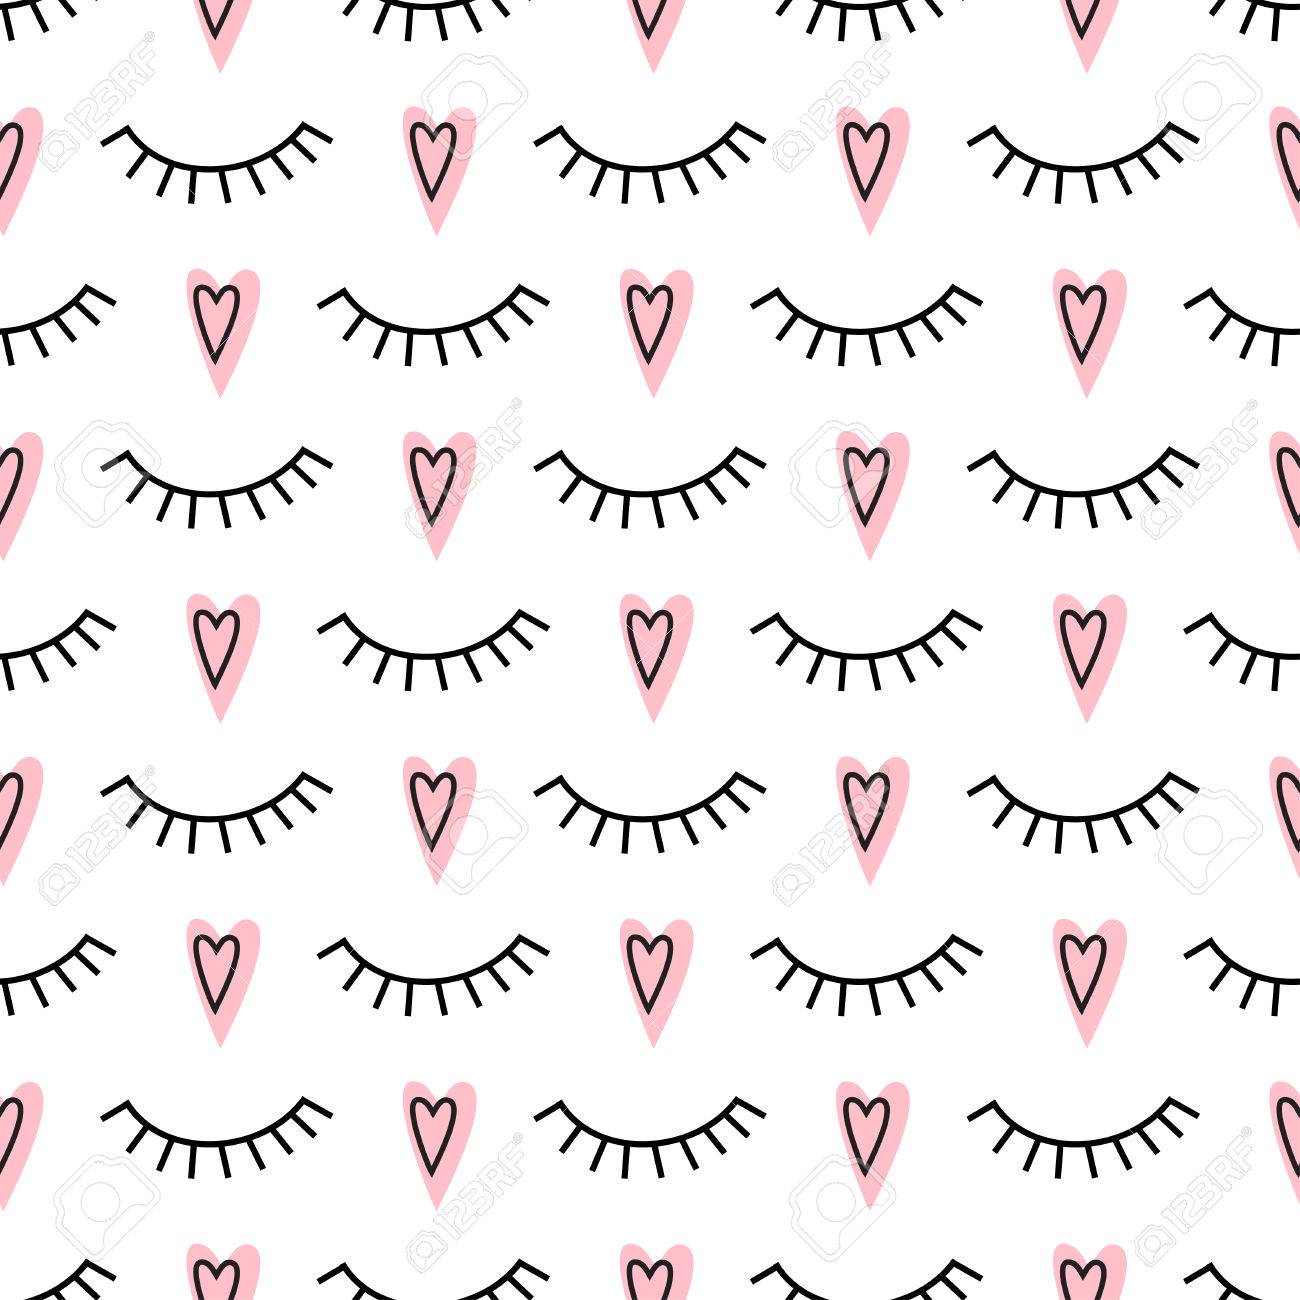 Abstract Pattern With Closed Eyes And Pink Hearts Cute Eyelashes